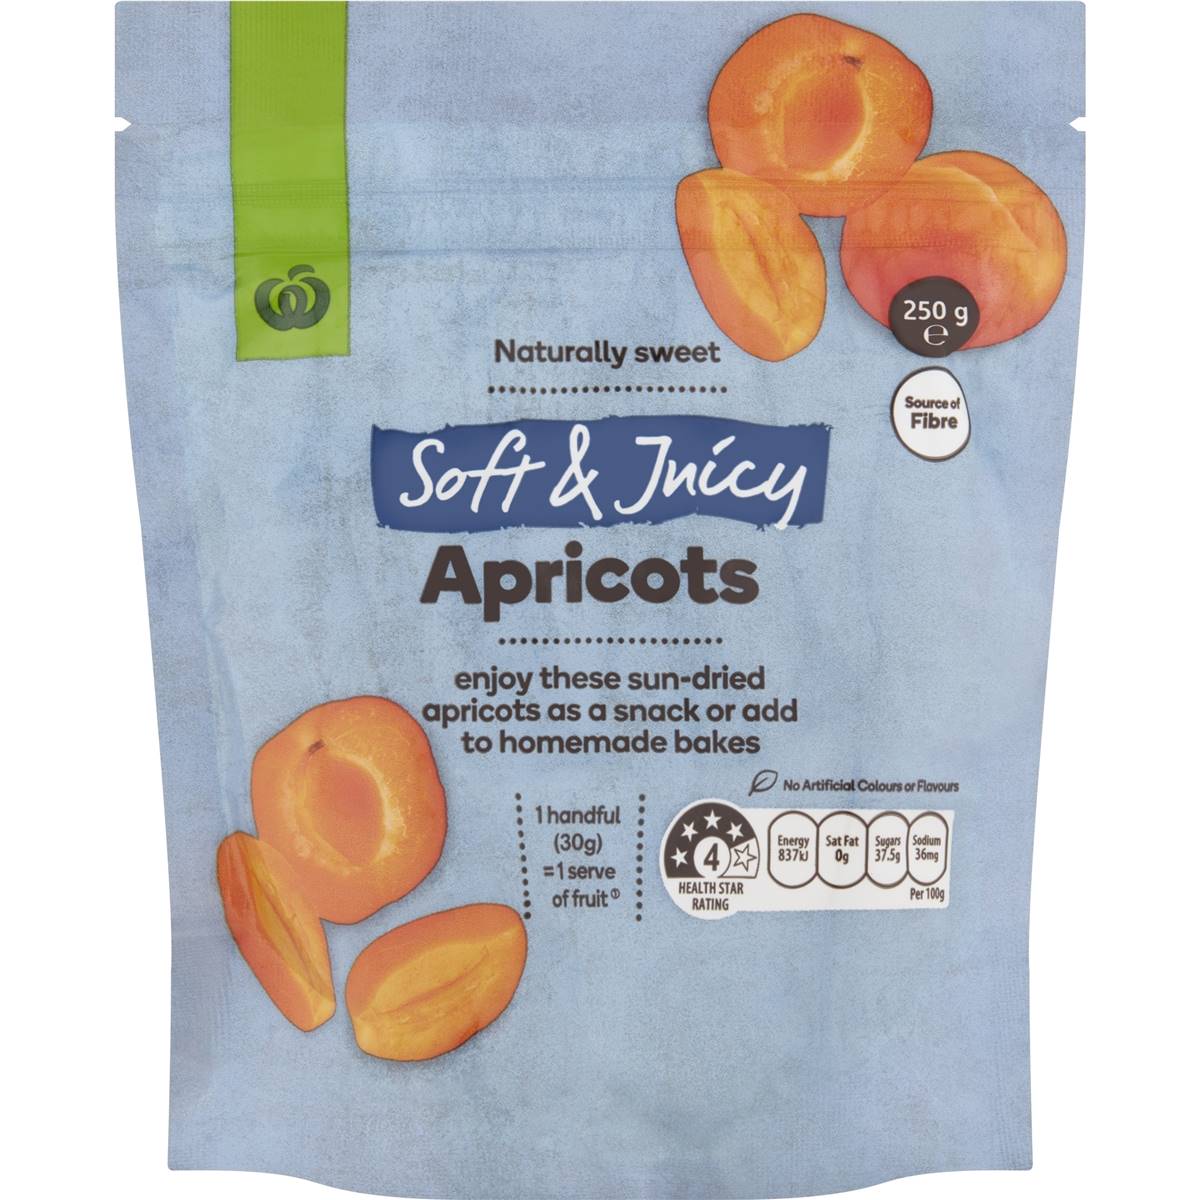 Calories in Woolworths Soft & Juicy Apricots